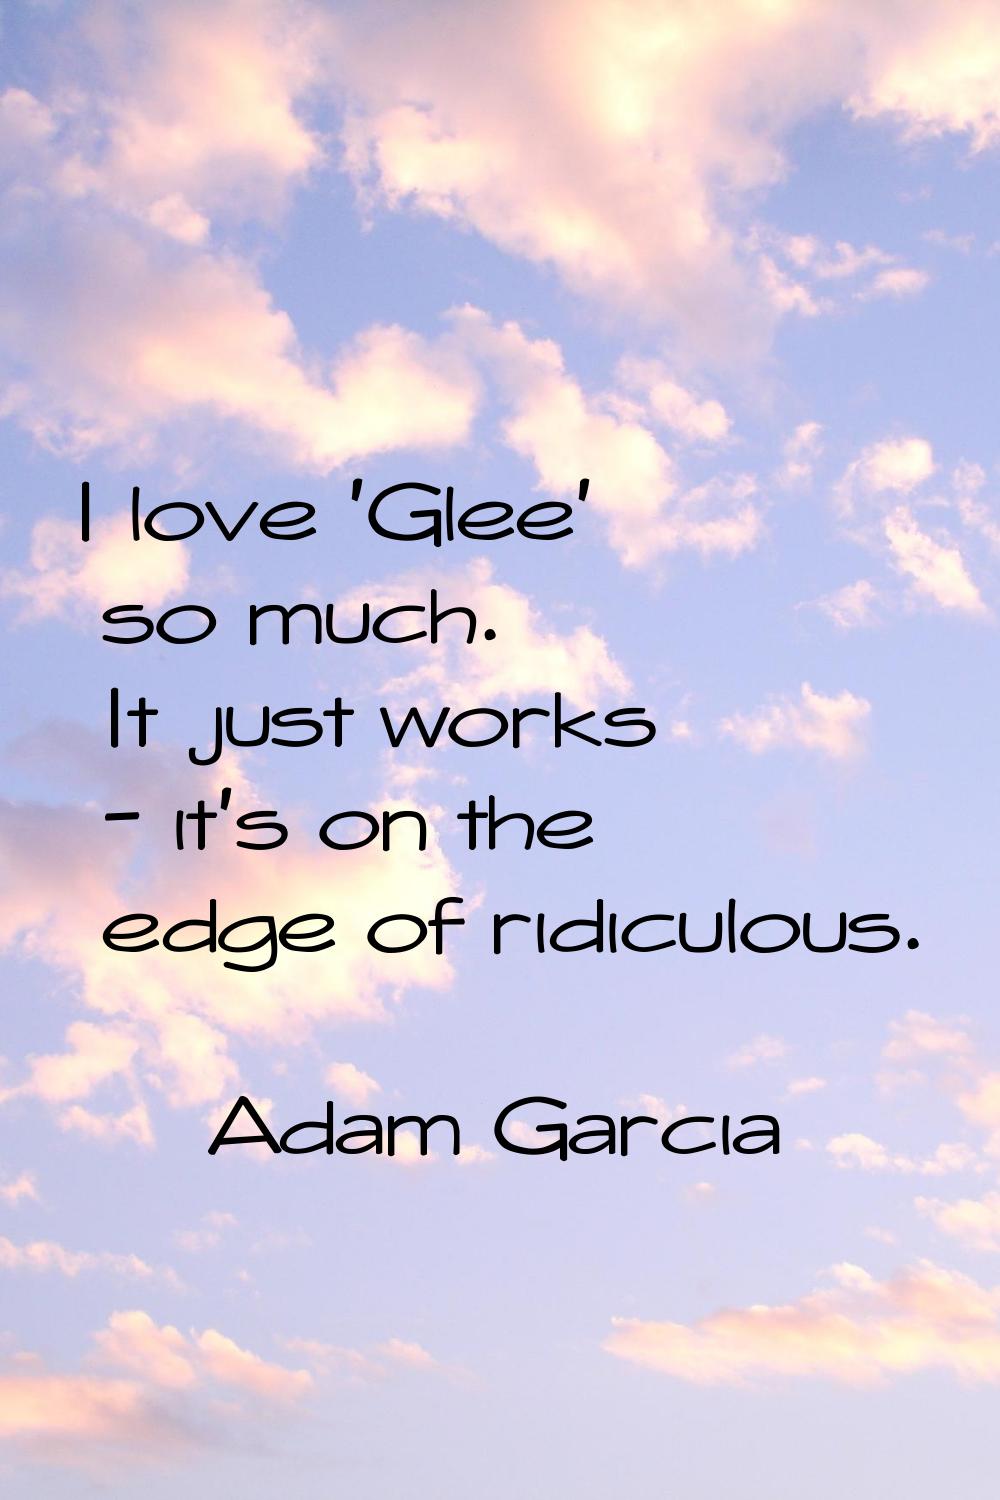 I love 'Glee' so much. It just works - it's on the edge of ridiculous.